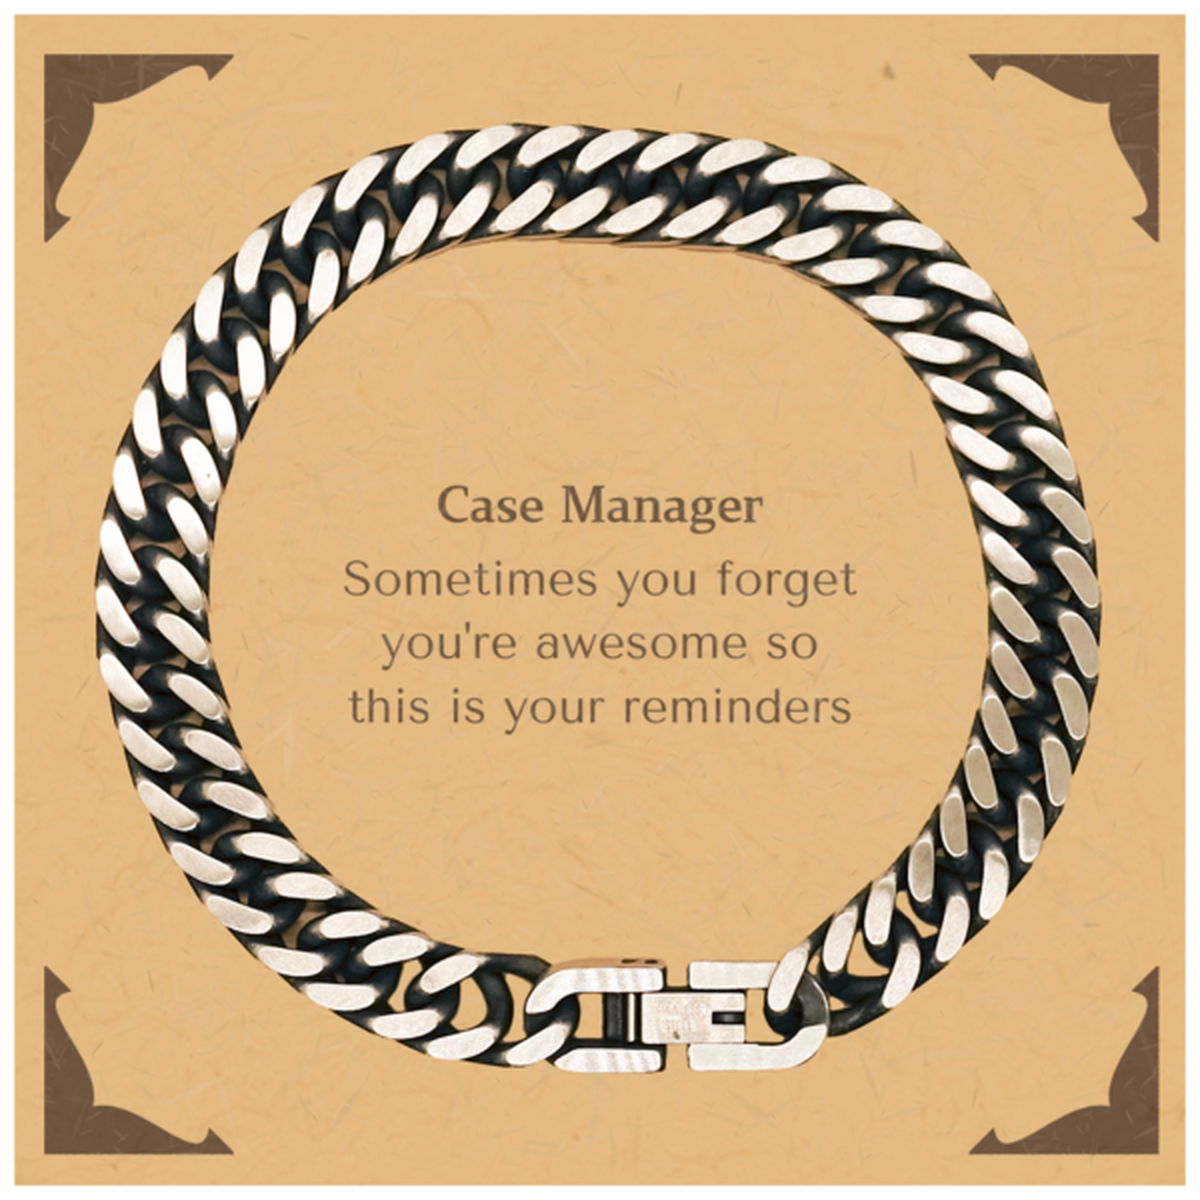 Sentimental Case Manager Cuban Link Chain Bracelet, Case Manager Sometimes you forget you're awesome so this is your reminders, Graduation Christmas Birthday Gifts for Case Manager, Men, Women, Coworkers